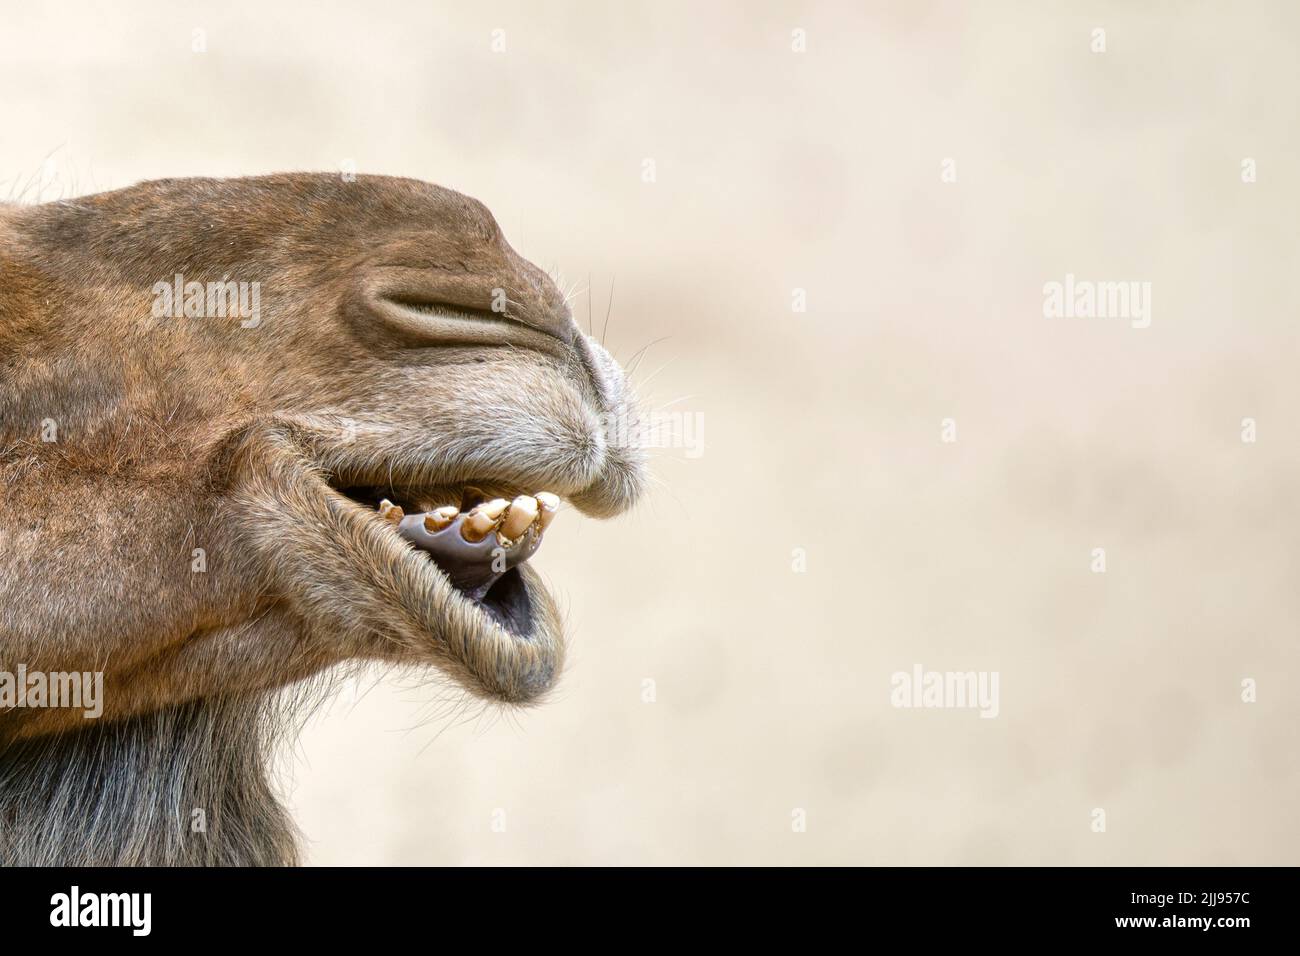 Head of a camel close-up.Close-up of the nose and mouth of a camel, opened his mouth and shows his teeth. Smiling camel. Stock Photo